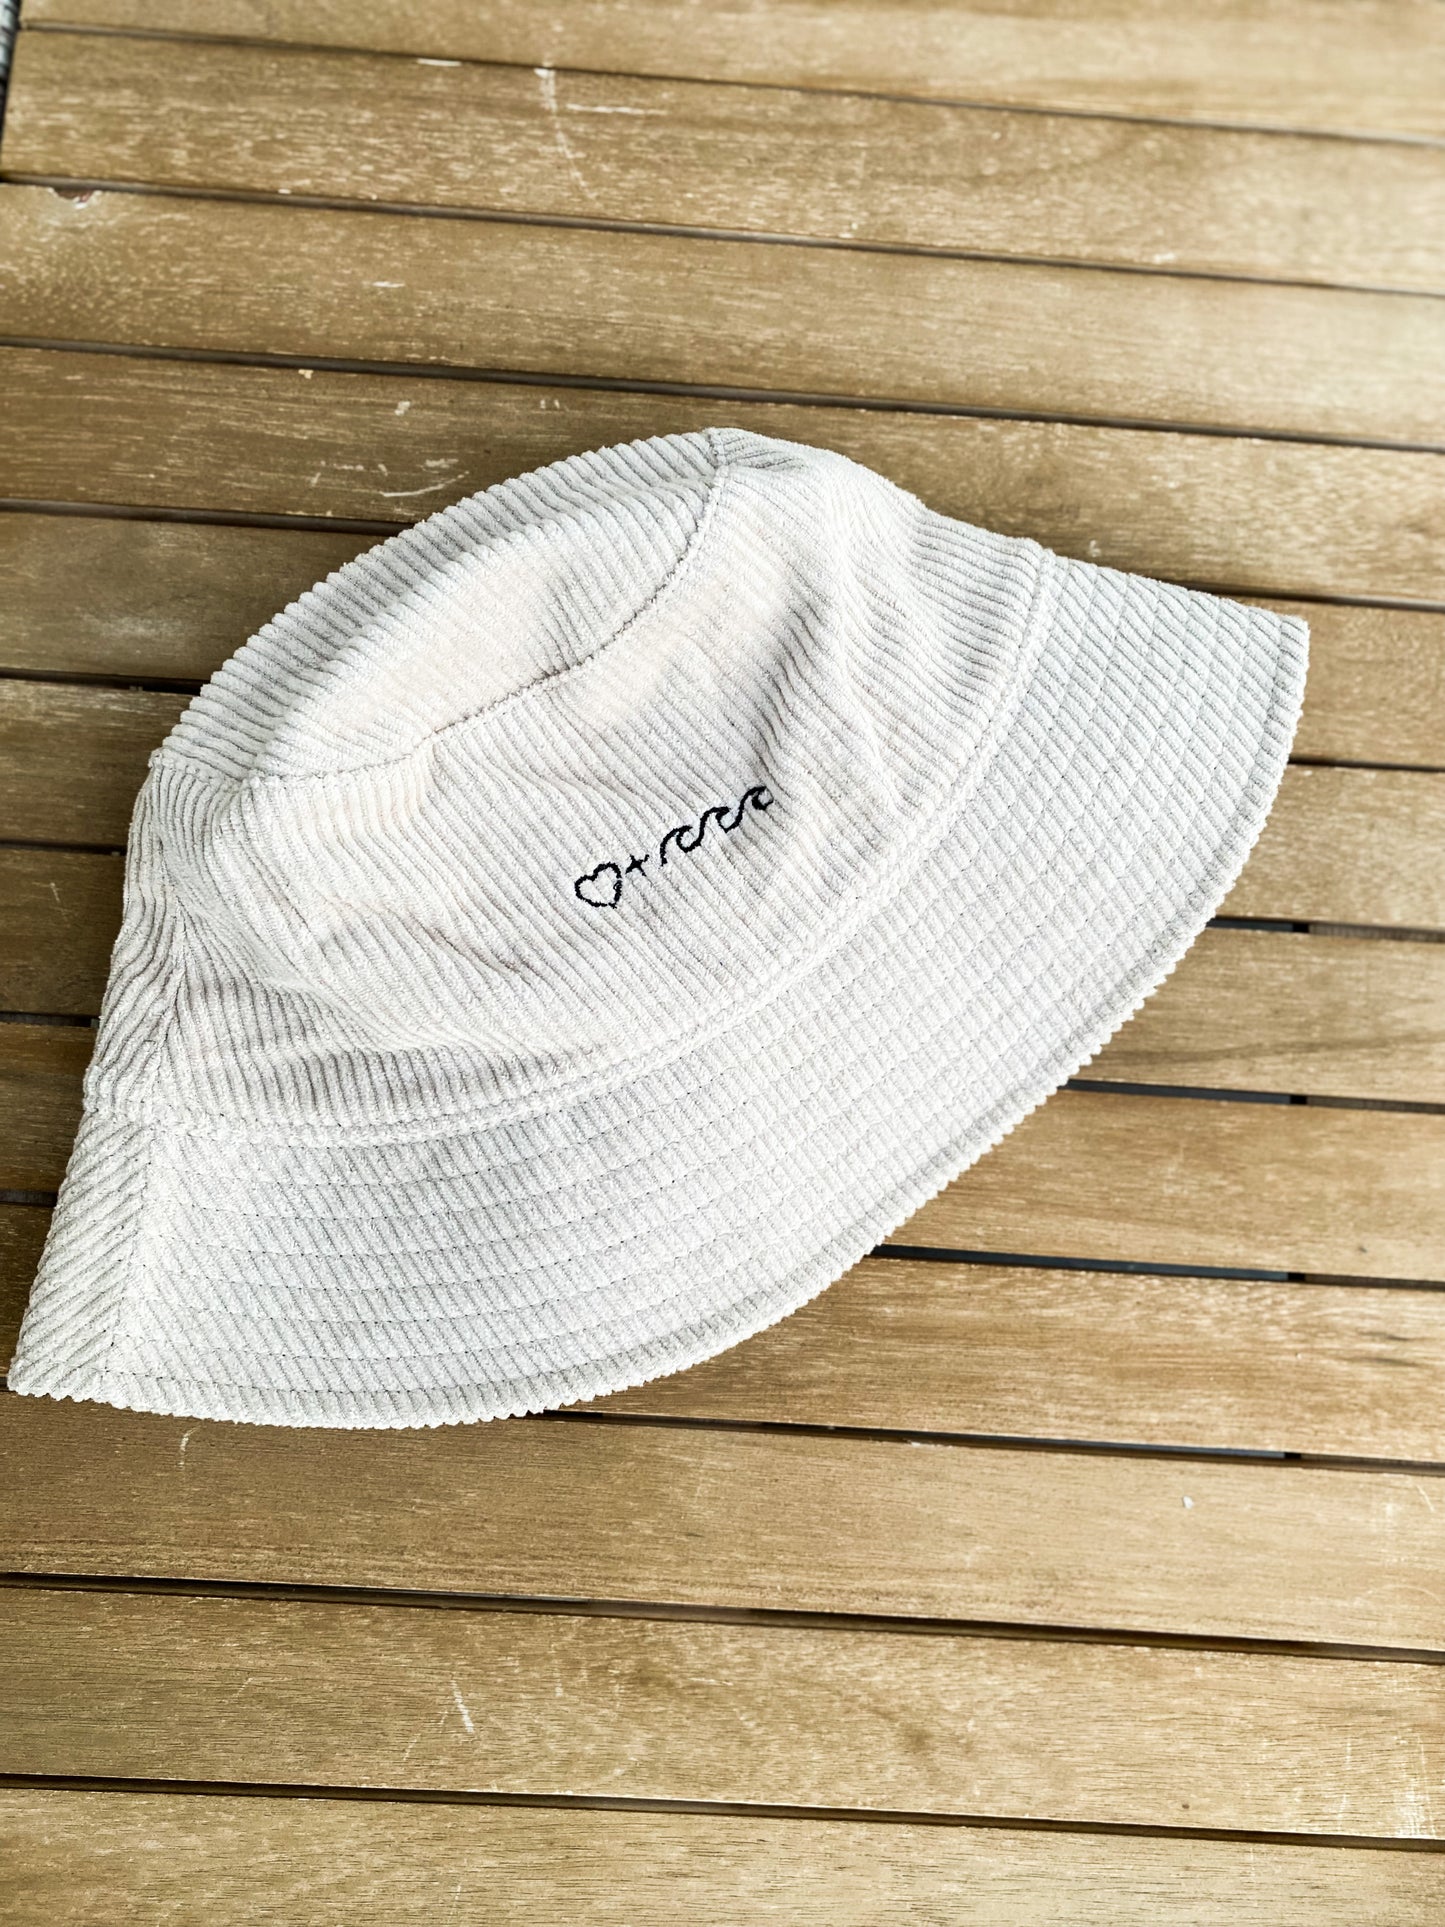 Amar Bucket hat - For the love of the ocean